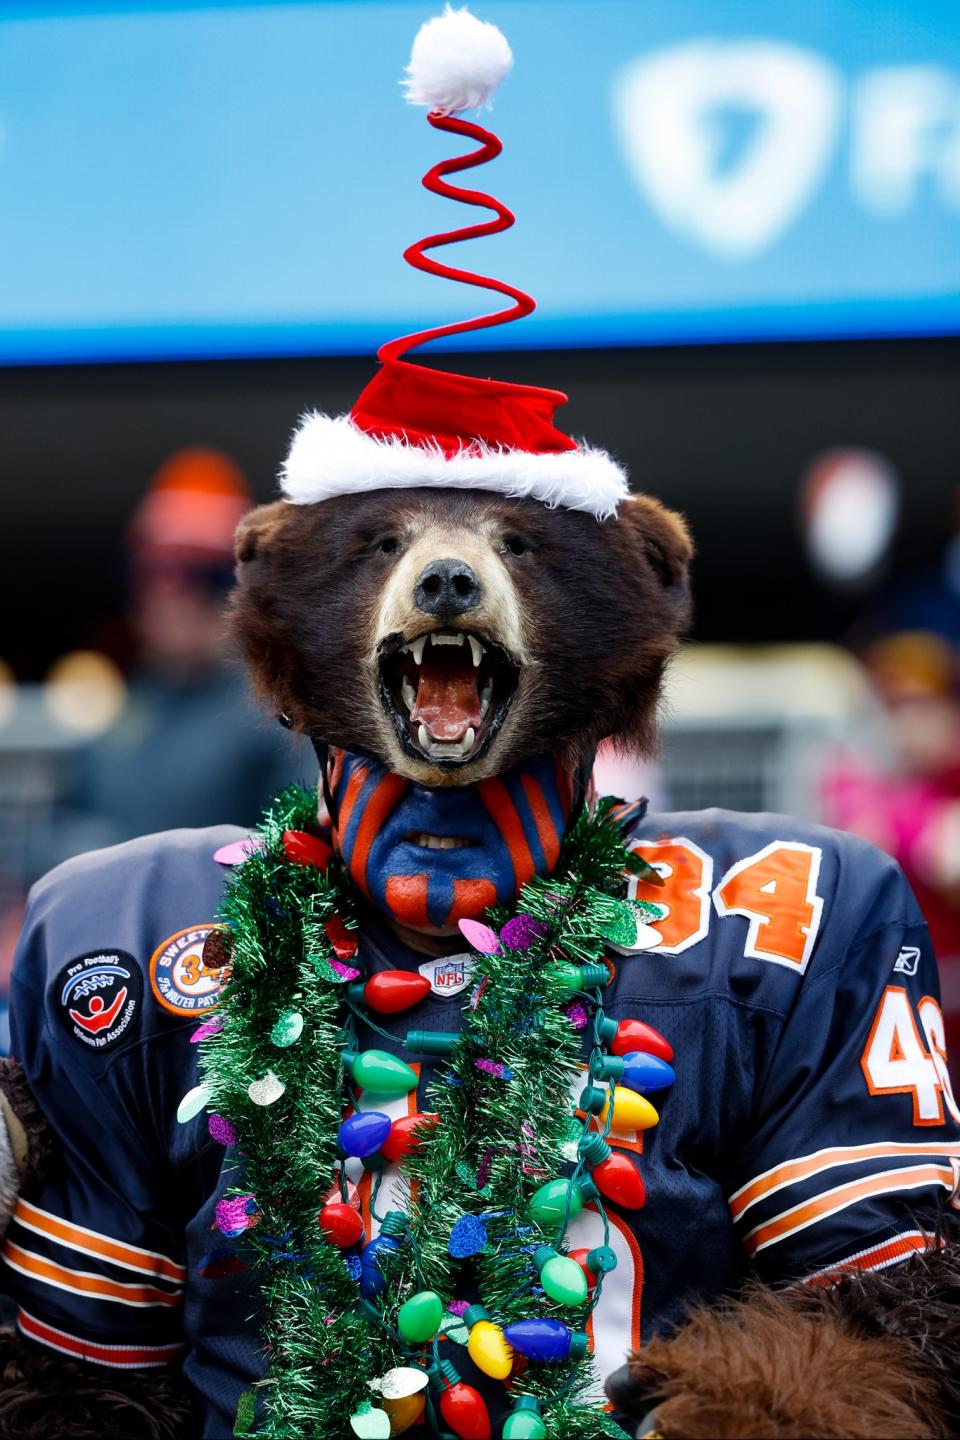 A Chicago Bears fan cheers during a game in Chicago, Ill.